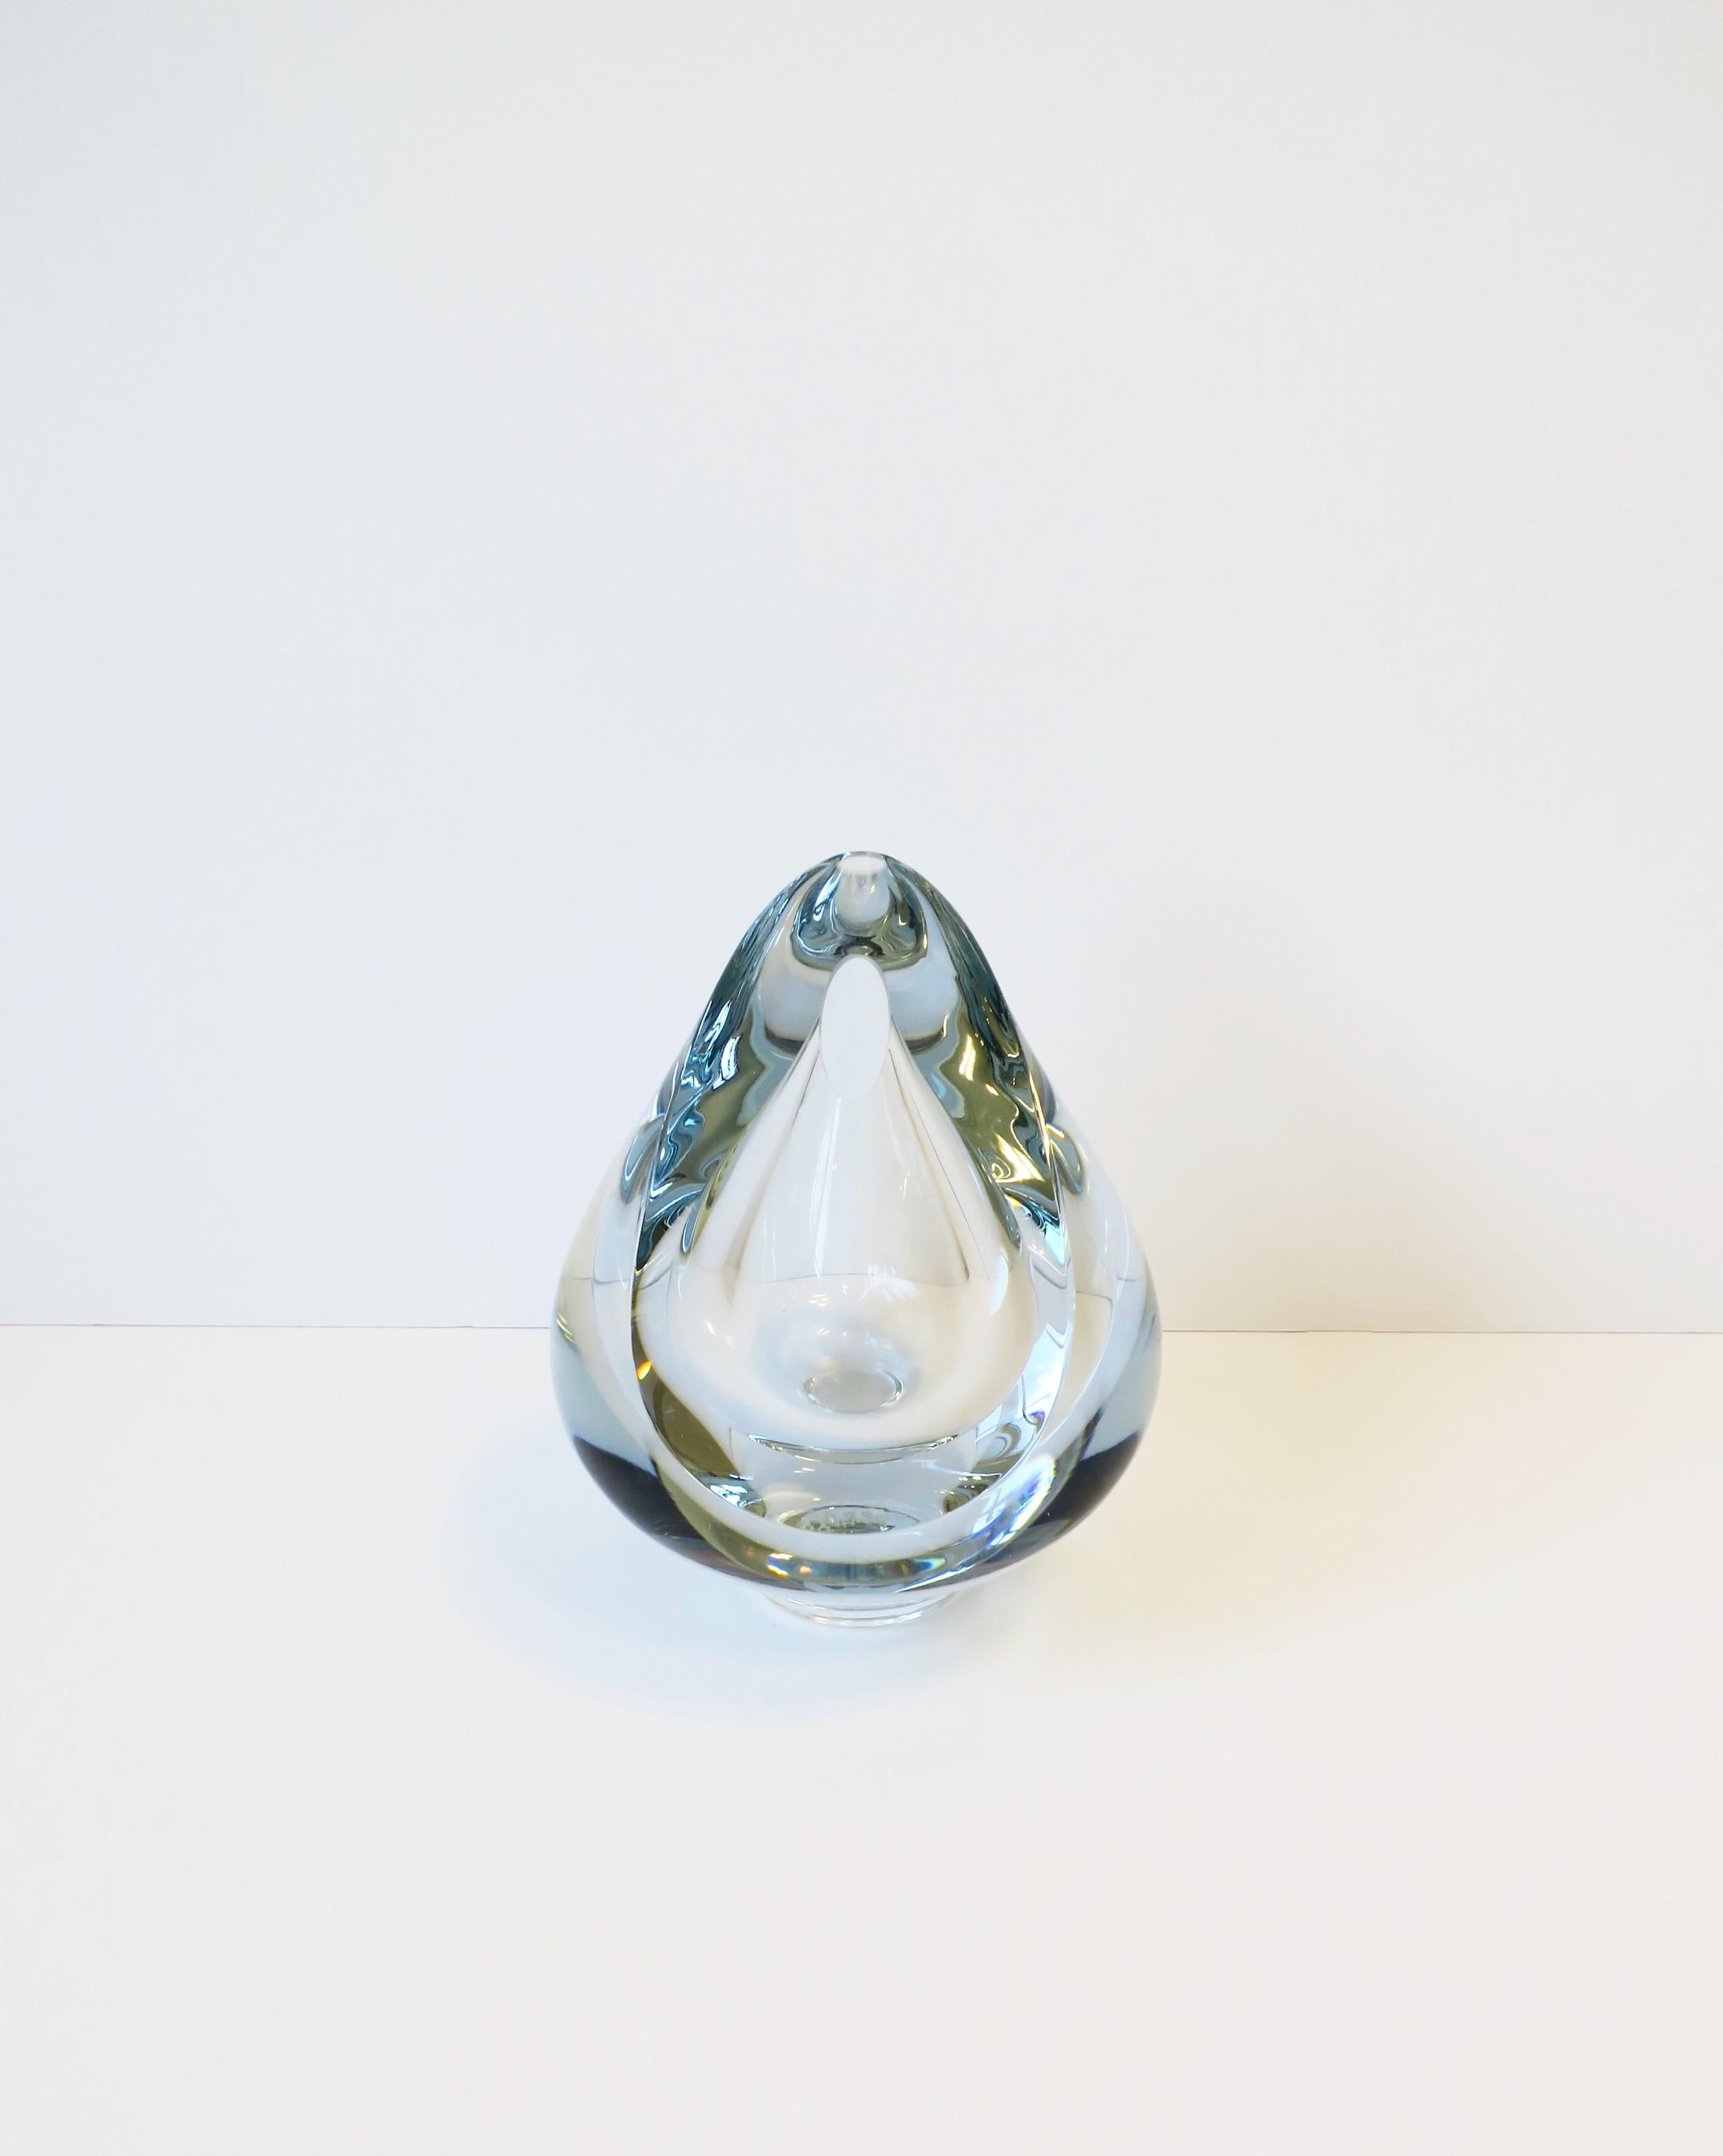 Hand-Crafted Art Glass Teardrop Vase or Decorative Object, Signed For Sale